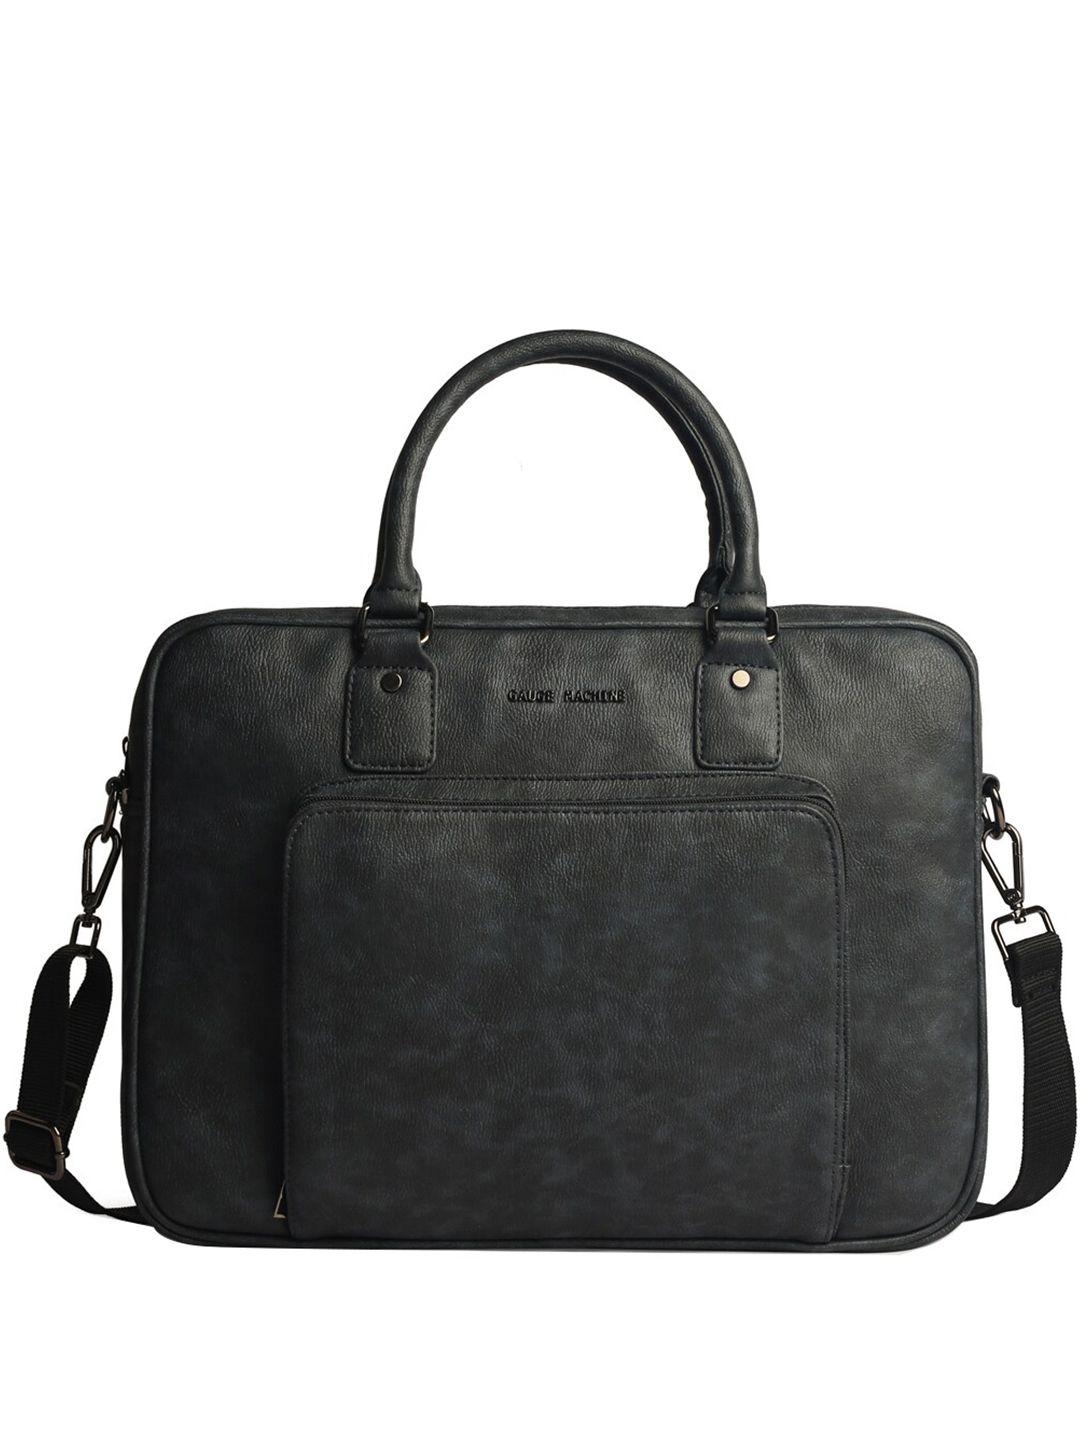 gauge machine unisex leather laptop bag up to 15 inch